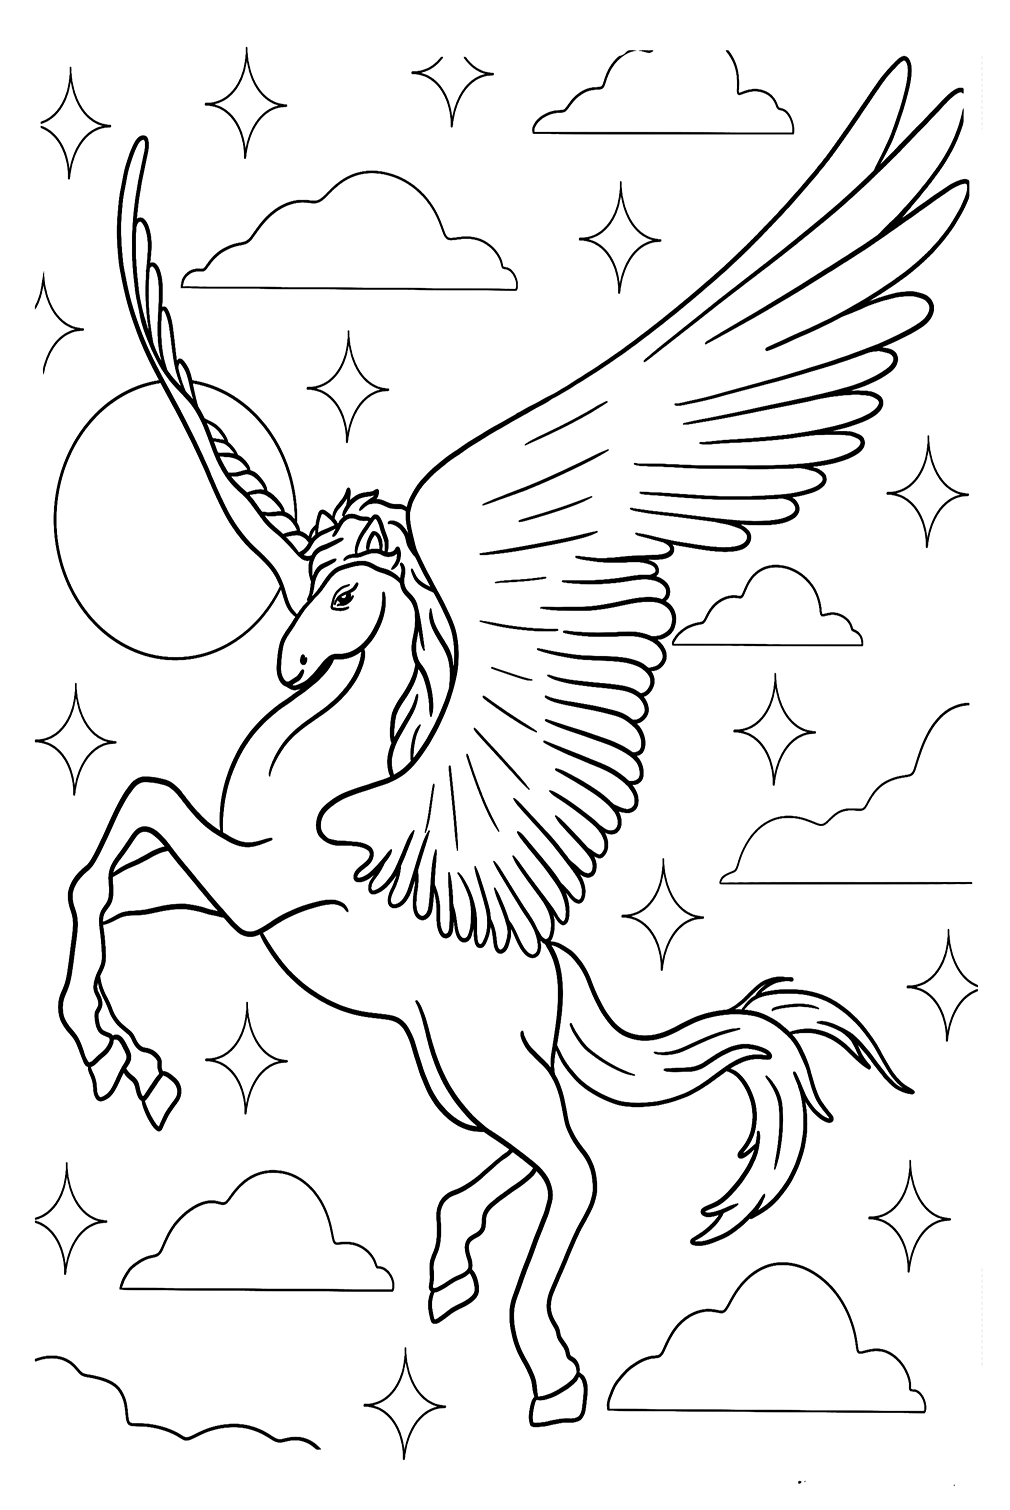 Unicorn Coloring Pages For Adults